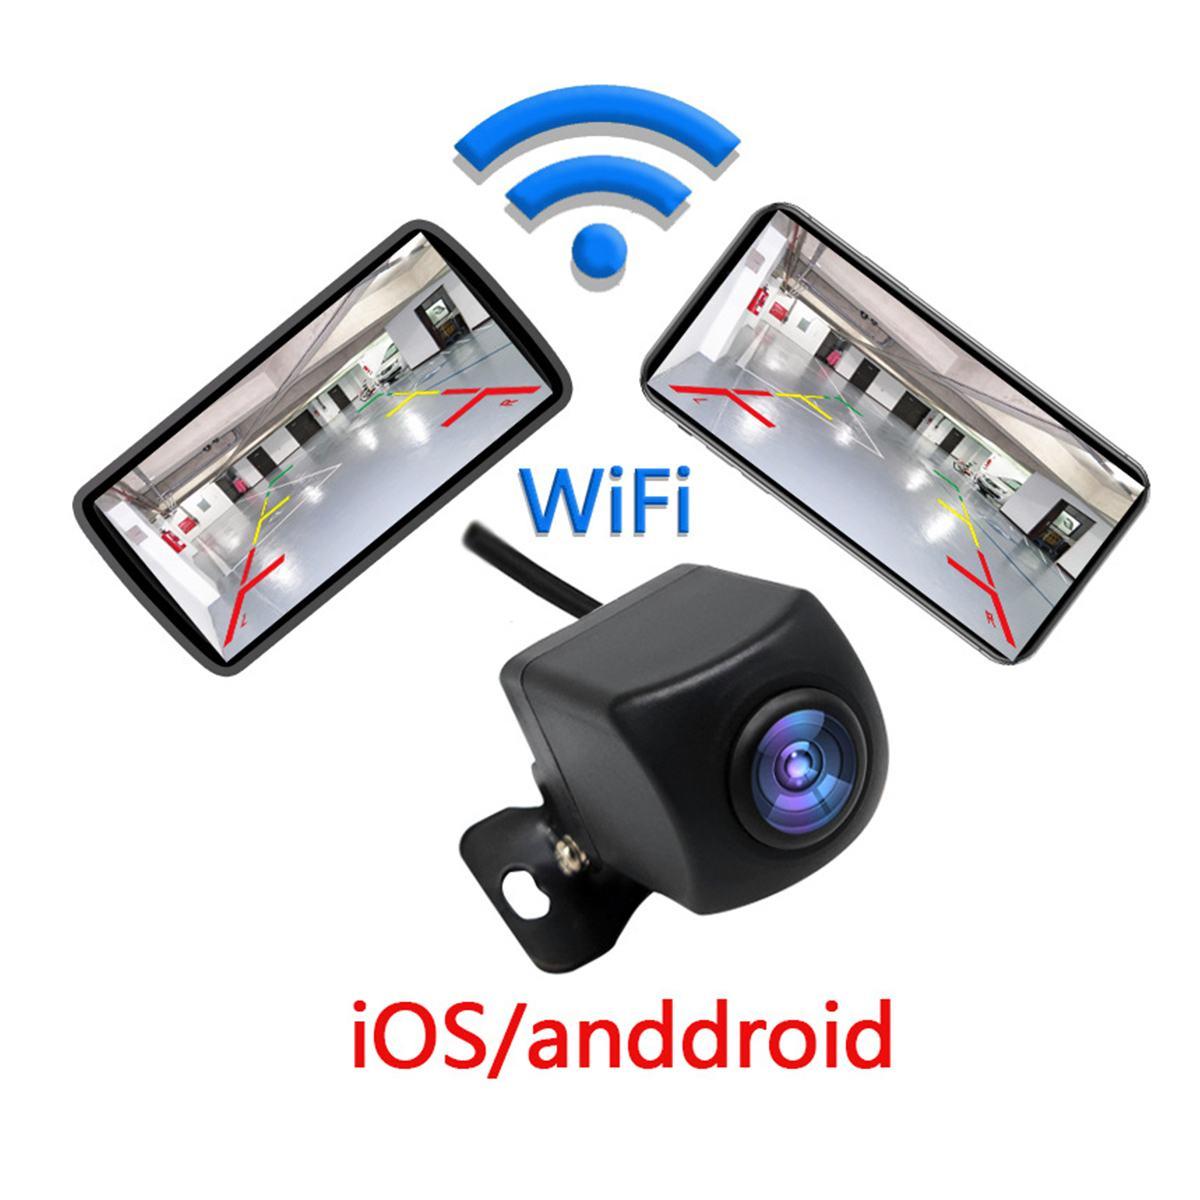 2.4G waterproof dust-proof Wifi Wireless IP67 Waterproof Car Rearview Camera No-light night vision For iOS / Android